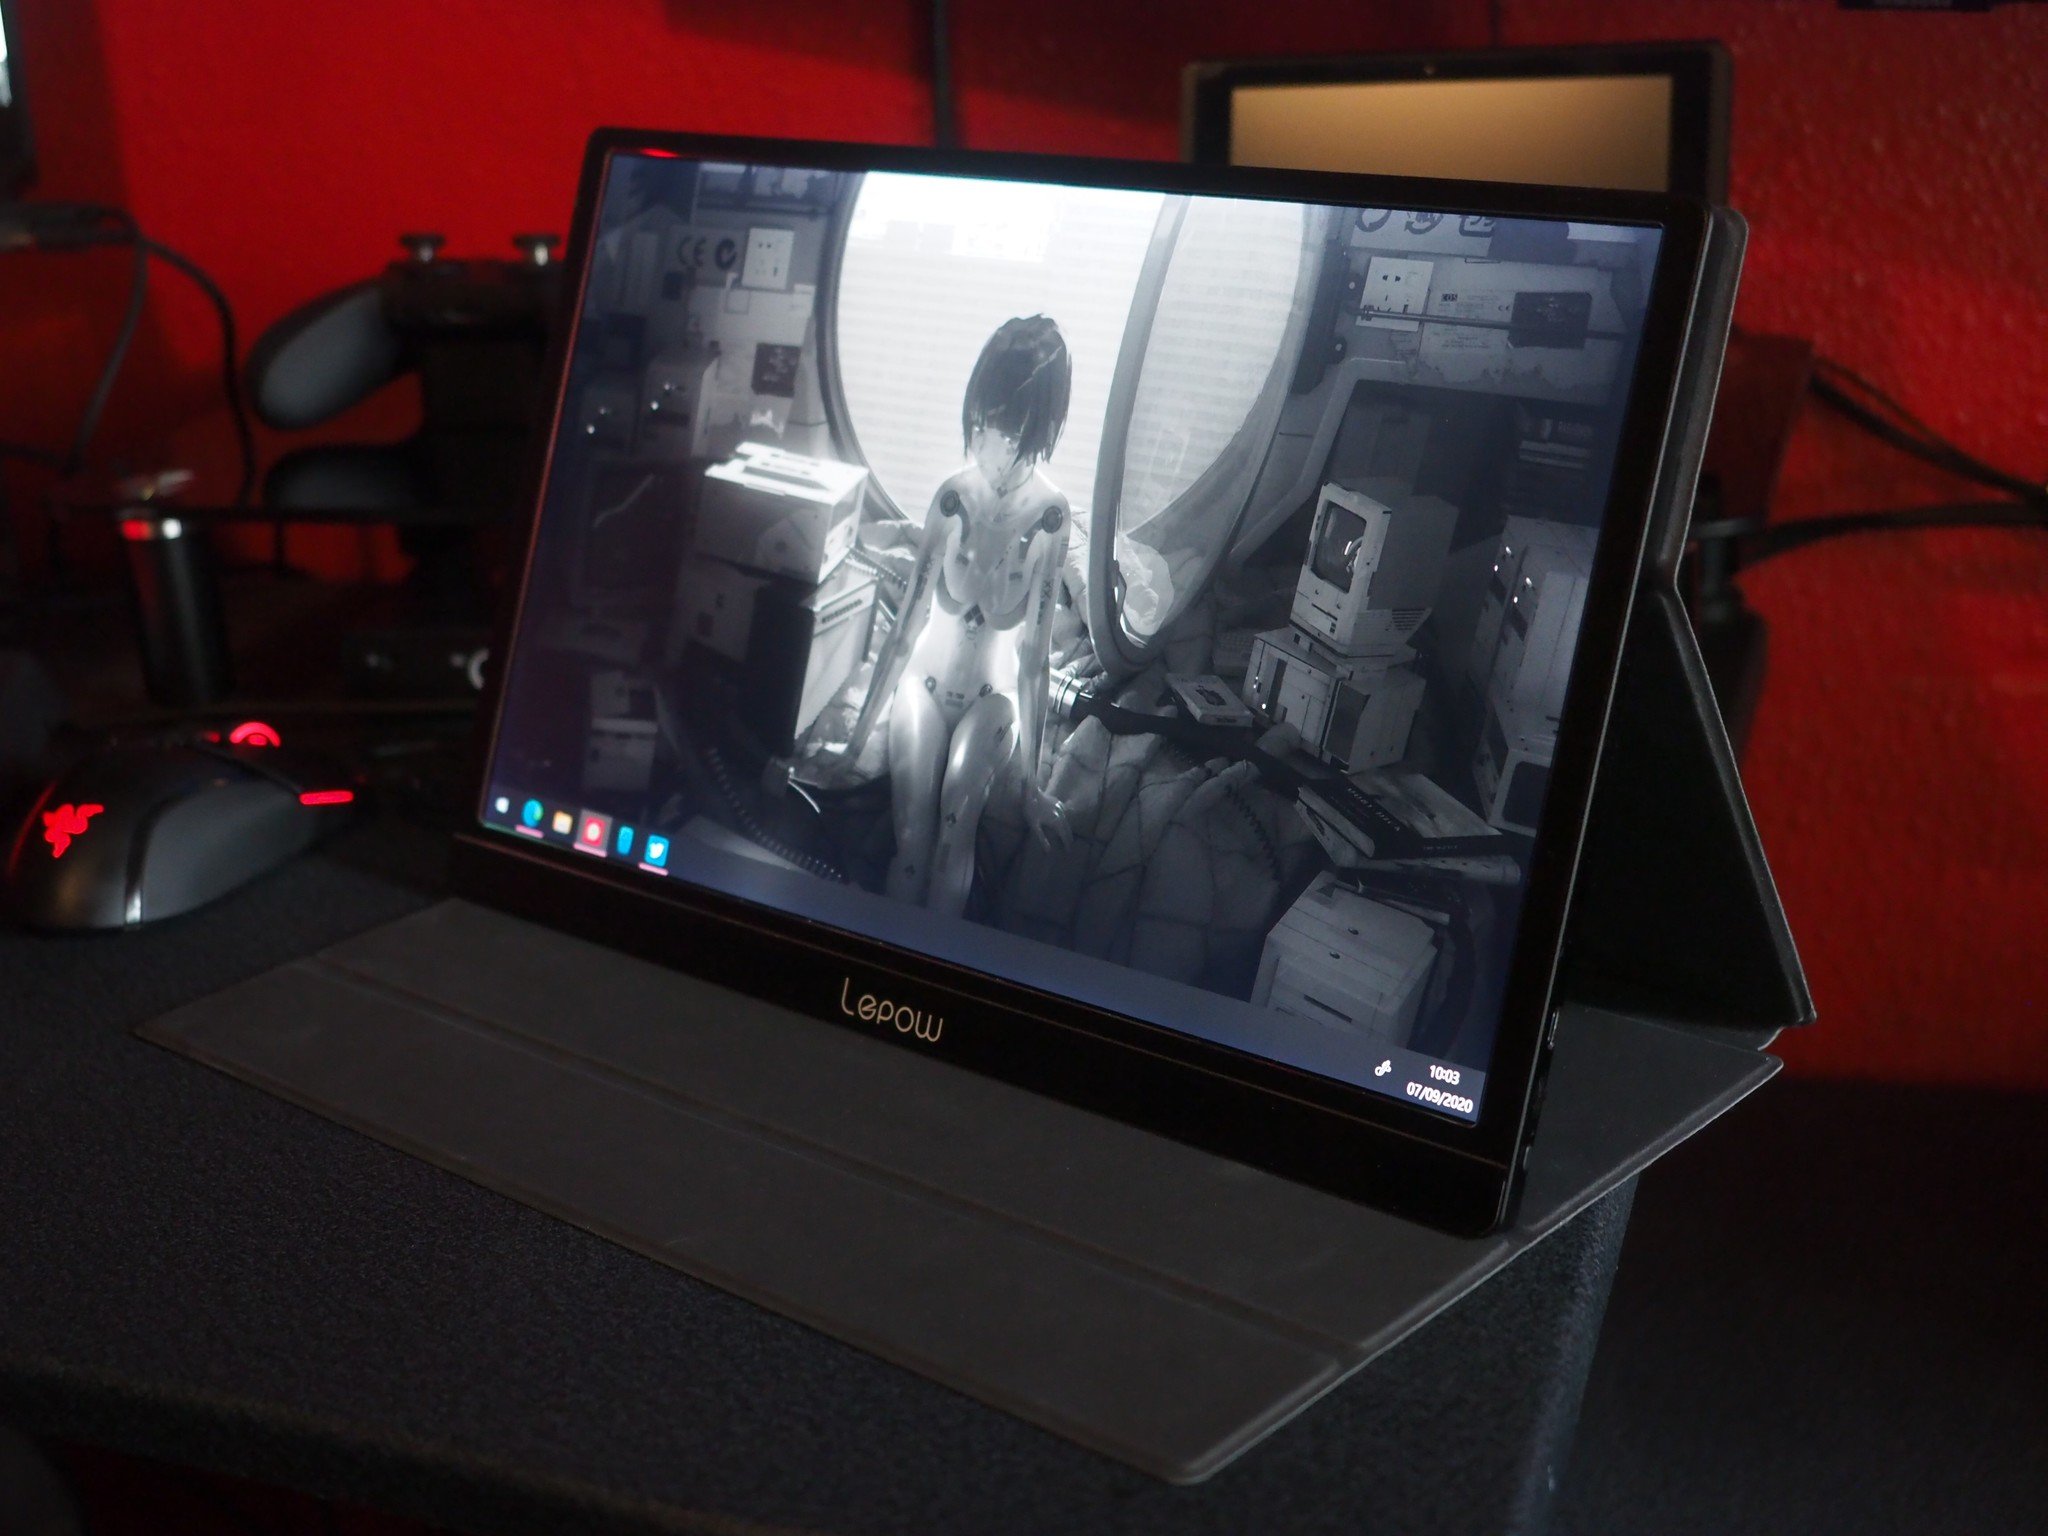 Lepow Z1 (2020) portable monitor review: Gaming, productivity, and more on the go